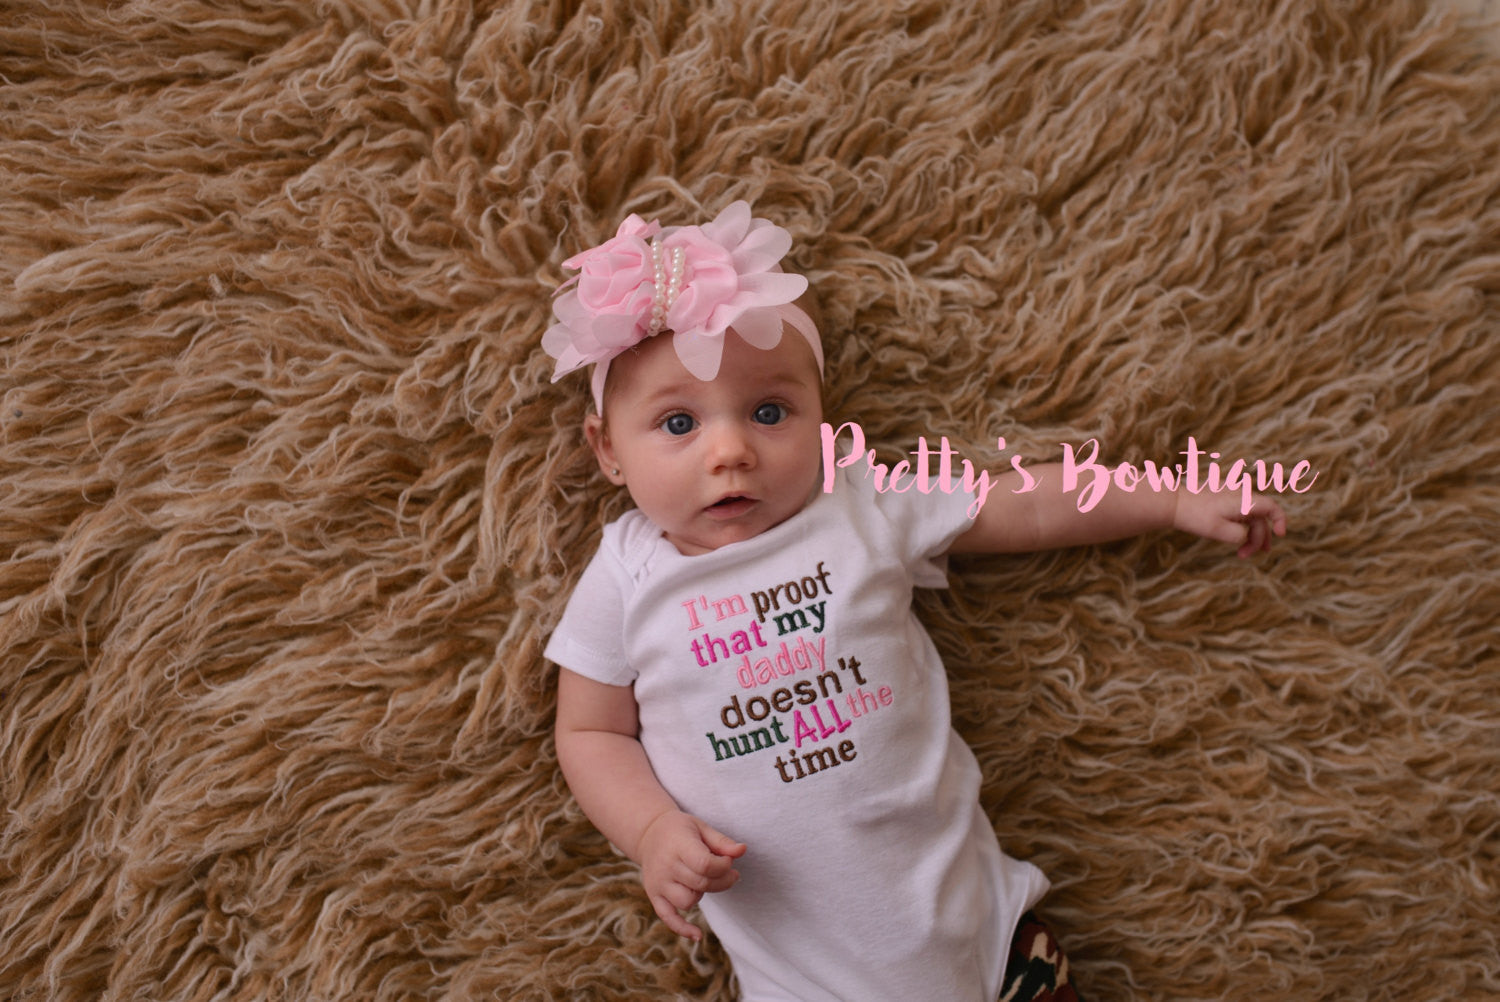 Daddys Girl Outfit – Hunting Dad Outfit with Camo Legwarmers & Flower  Headband – I'm Proof That My Daddy Doesn't Hunt All the Time